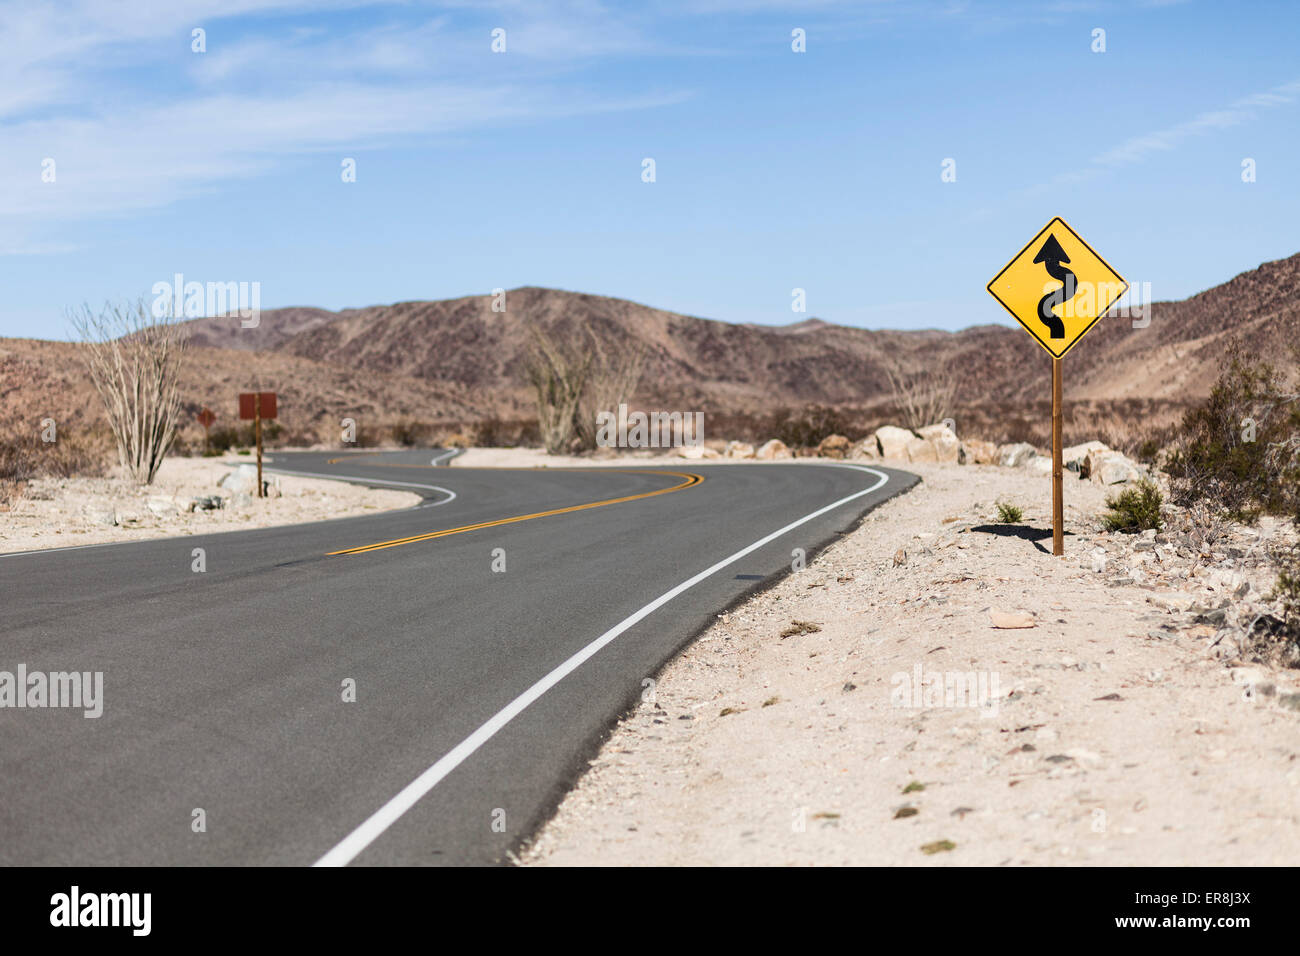 Directional sign by road at Joshua Tree National Park against sky Stock Photo